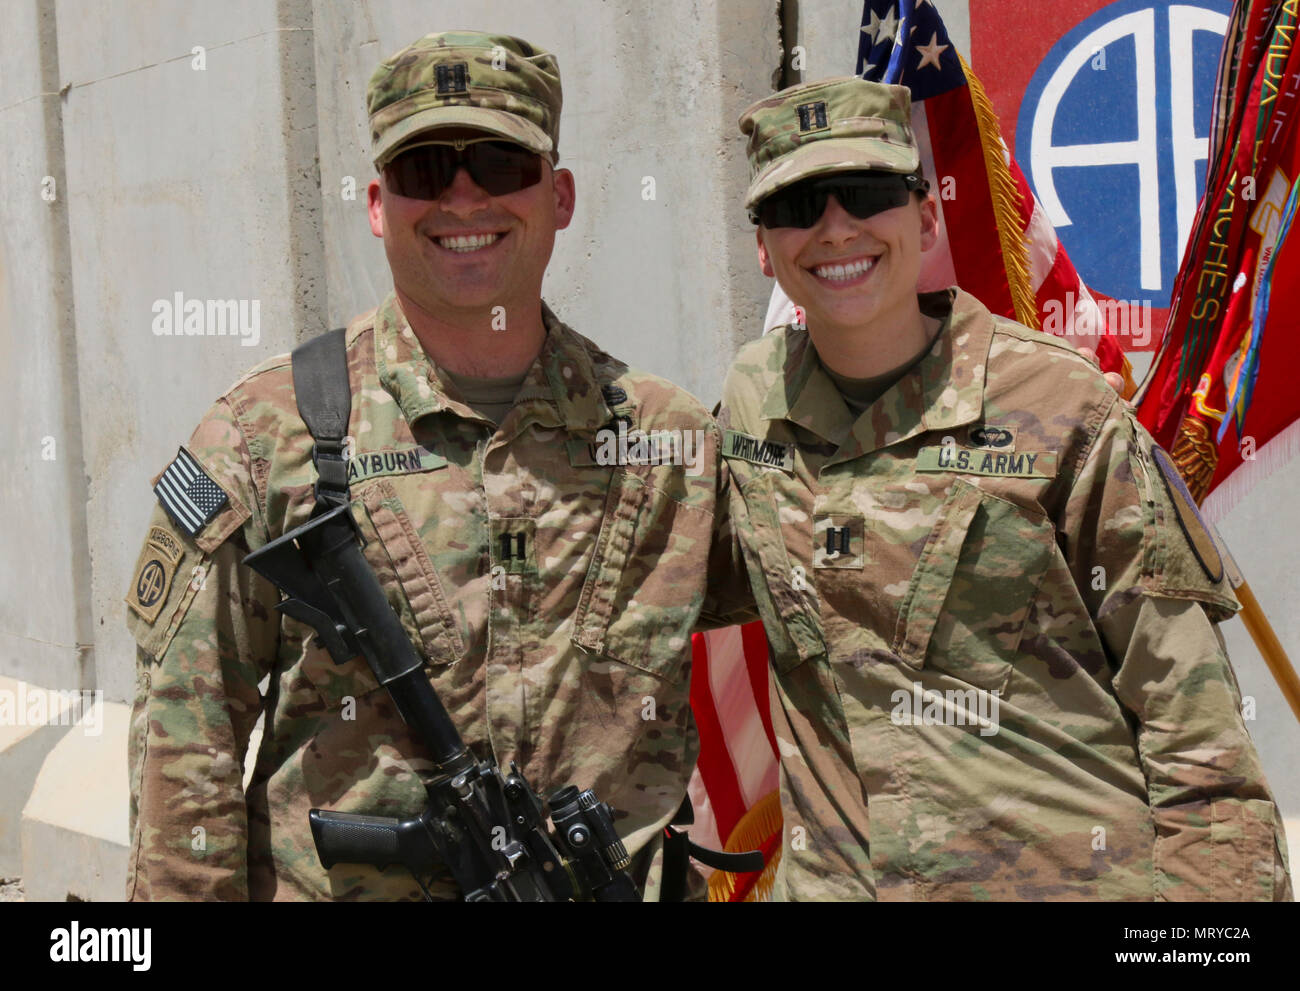 U.S. Army Capt. Kaitlin Whitmore, commander of Charlie Company, 215th Brigade Support Battalion, 3rd Armored Brigade Combat Team, 1st Cavalry Division, and her brother, U.S. Army Capt. Scott Rayburn, incoming commander of Alpha Company, 37th Engineer Battalion, 2nd Brigade Combat Team, 82nd Airborne Division, were able to see each other briefly when she attended his first change-of-command ceremony in Qayyarah West Airfield, Iraq, July 1, 2017. The siblings, who hail from Gainesville, Florida, both attended ROTC in college and were even commissioned during the same week in 2011. (U.S. Army pho Stock Photo